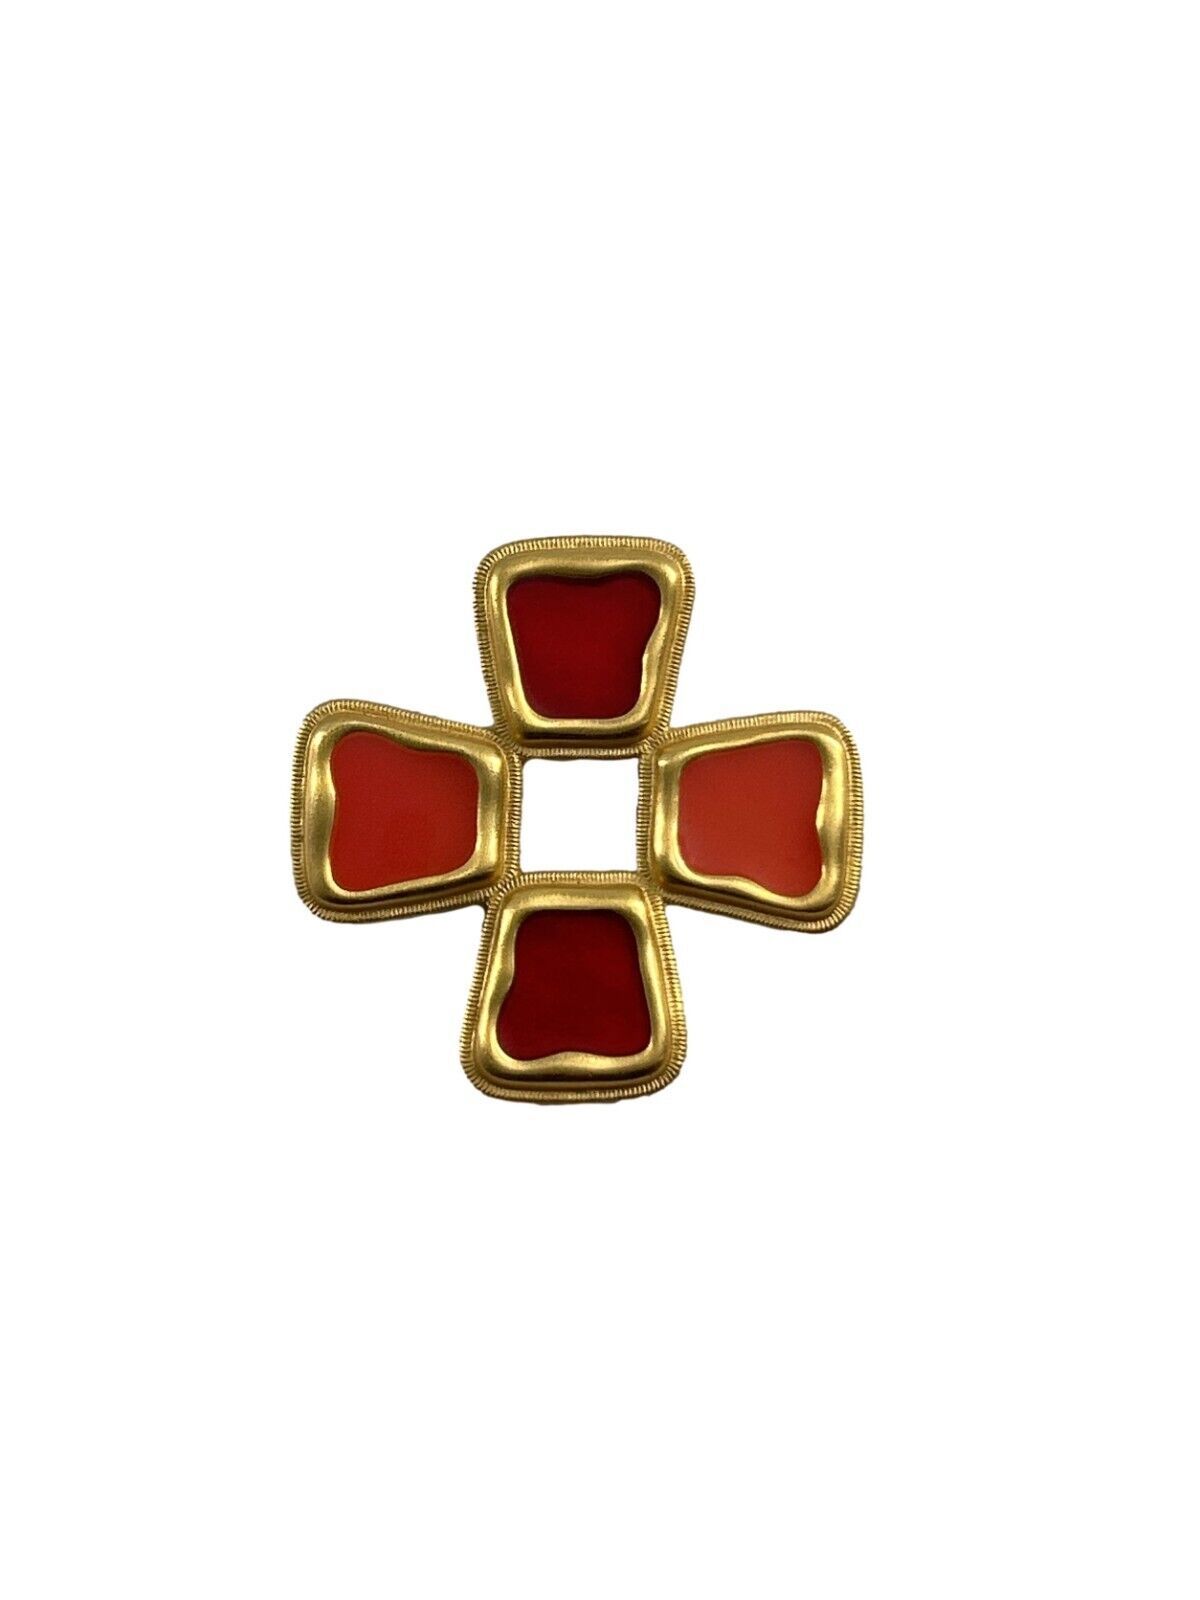 Primary image for Vintage Anne Klein Large Maltese Cross Brooch Pin Byzantine Gold Tone Enamel